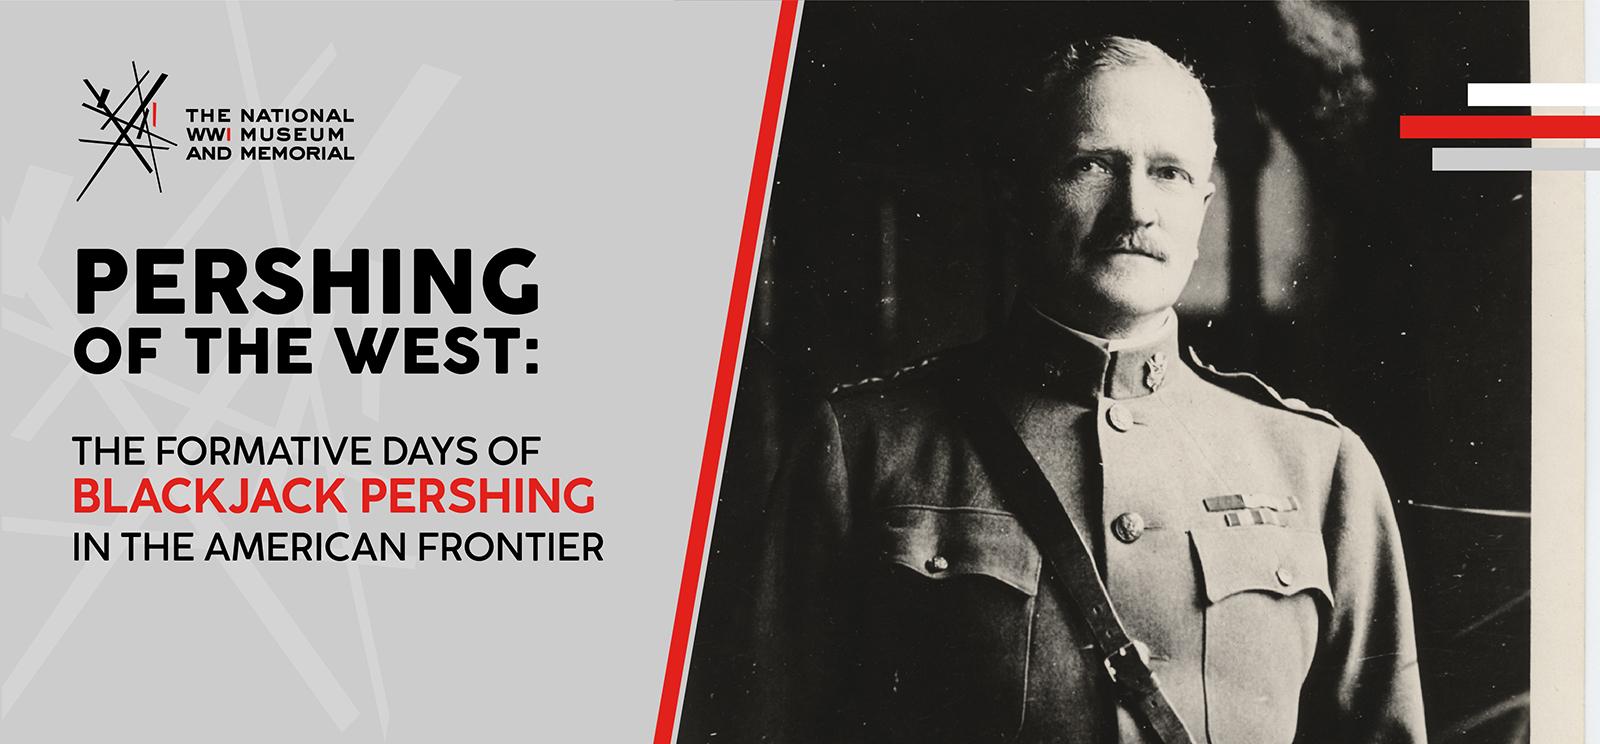 Image: black and white photo of a stern-looking white man in military uniform looking at the viewer. Text: 'Pershing of the West: The Formative Days of Blackjack Pershing in the American Frontier'